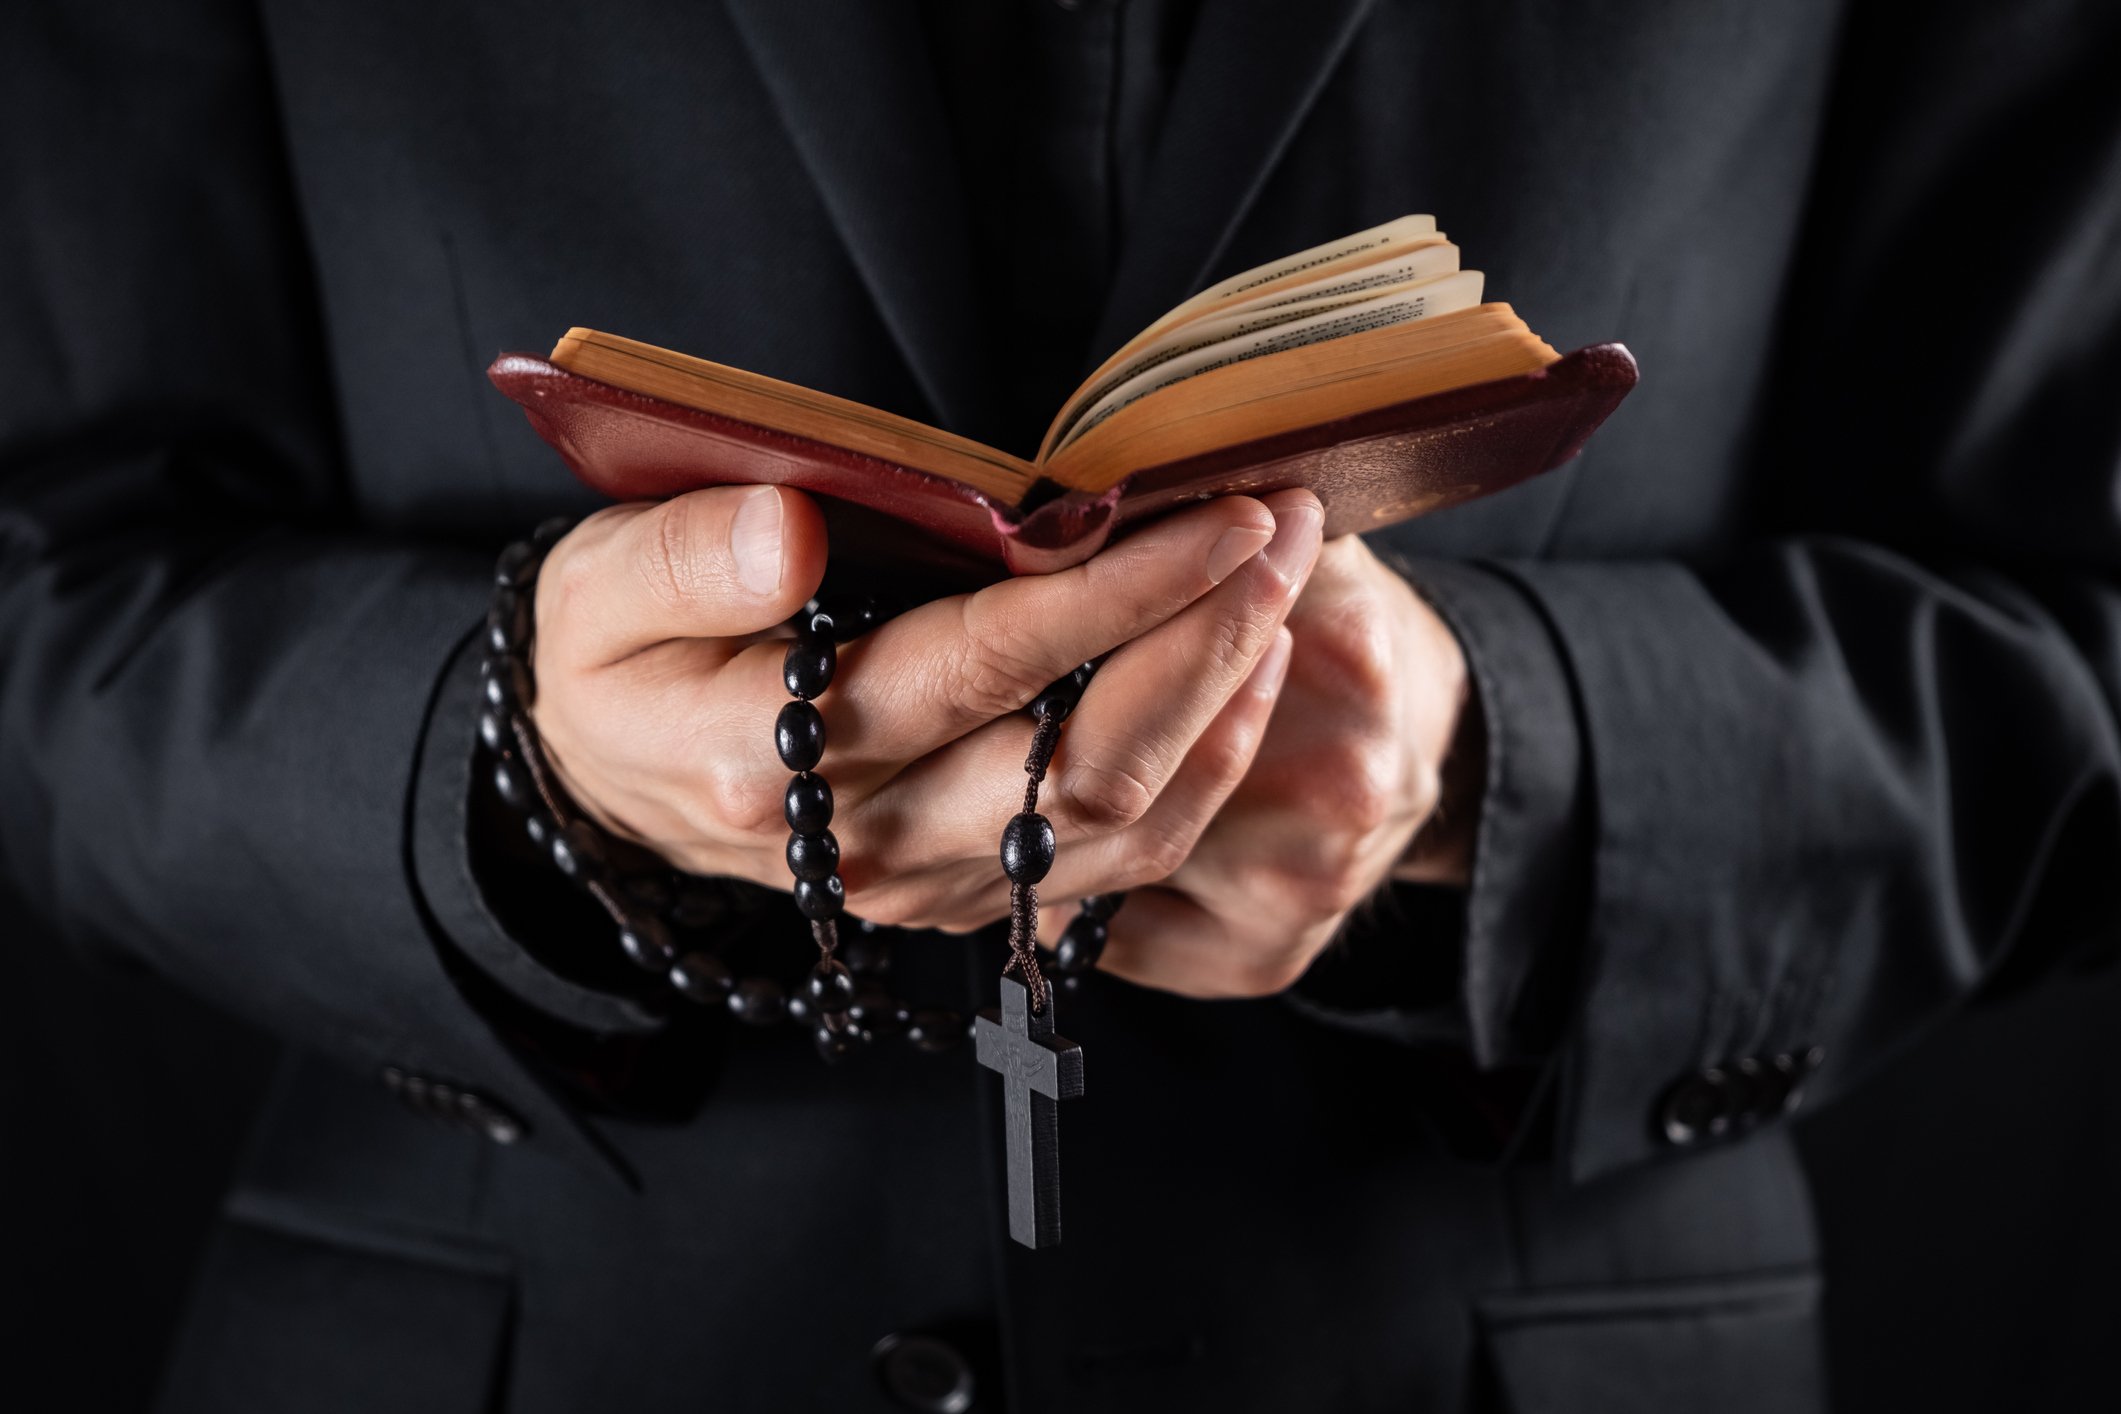 Hands of a christian priest dressed in black holding a crucifix and reading New Testament book | Photo: Getty Images